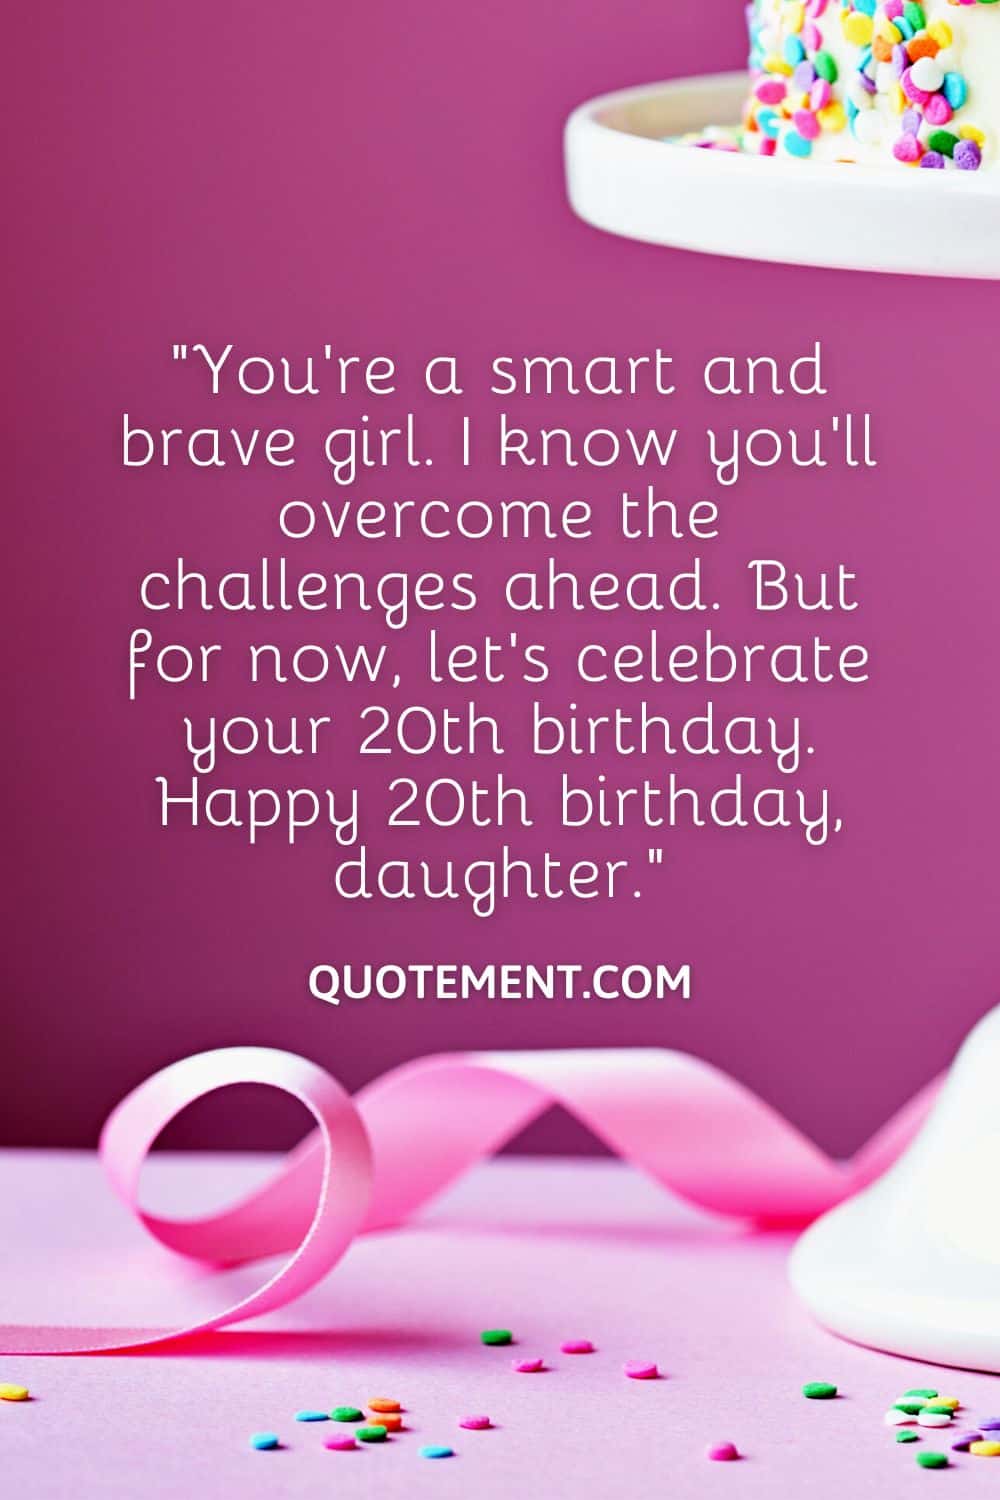 You’re a smart and brave girl. I know you’ll overcome the challenges ahead